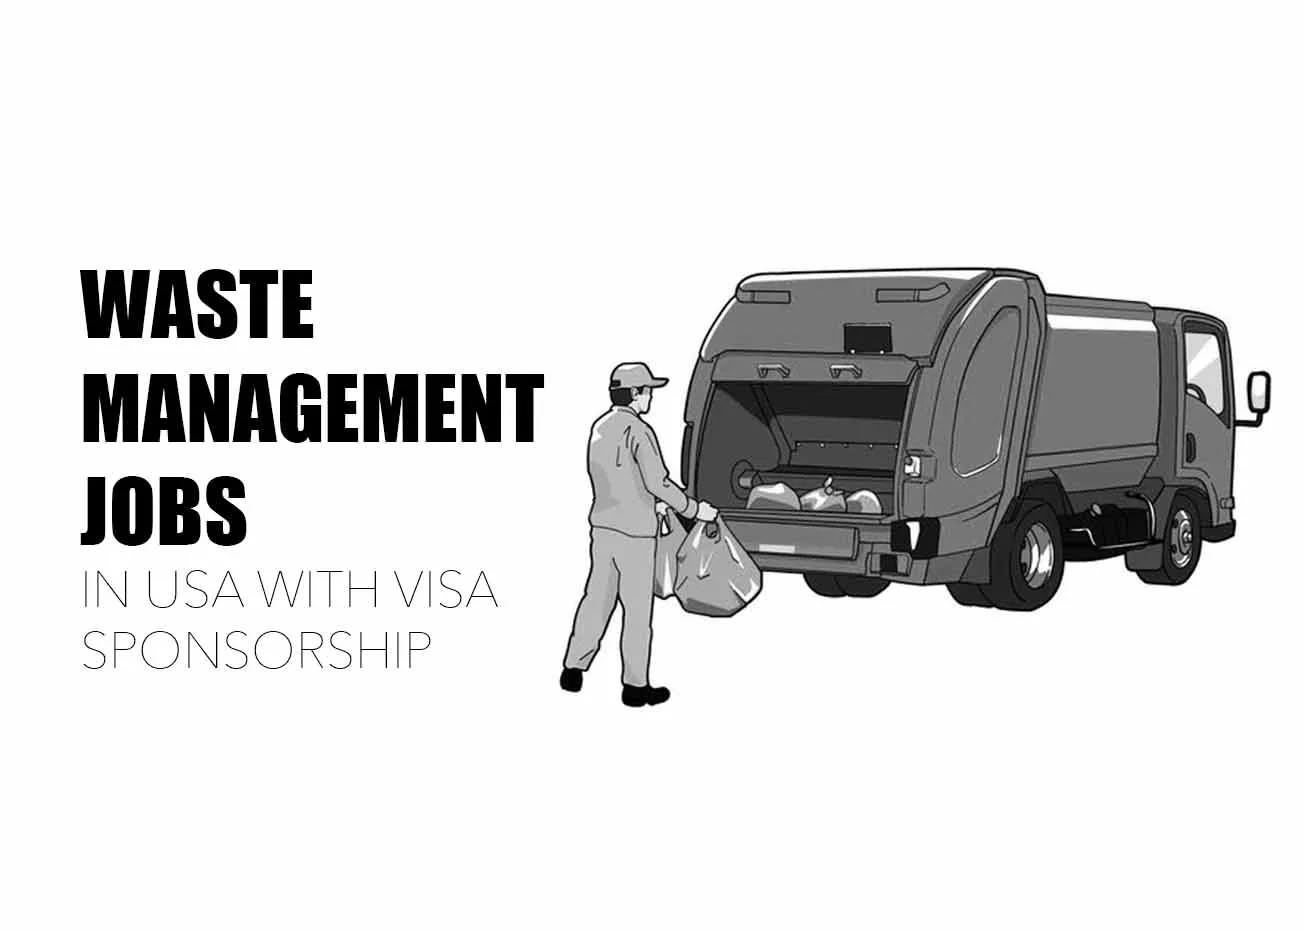 Waste Management Jobs in USA with Visa Sponsorship